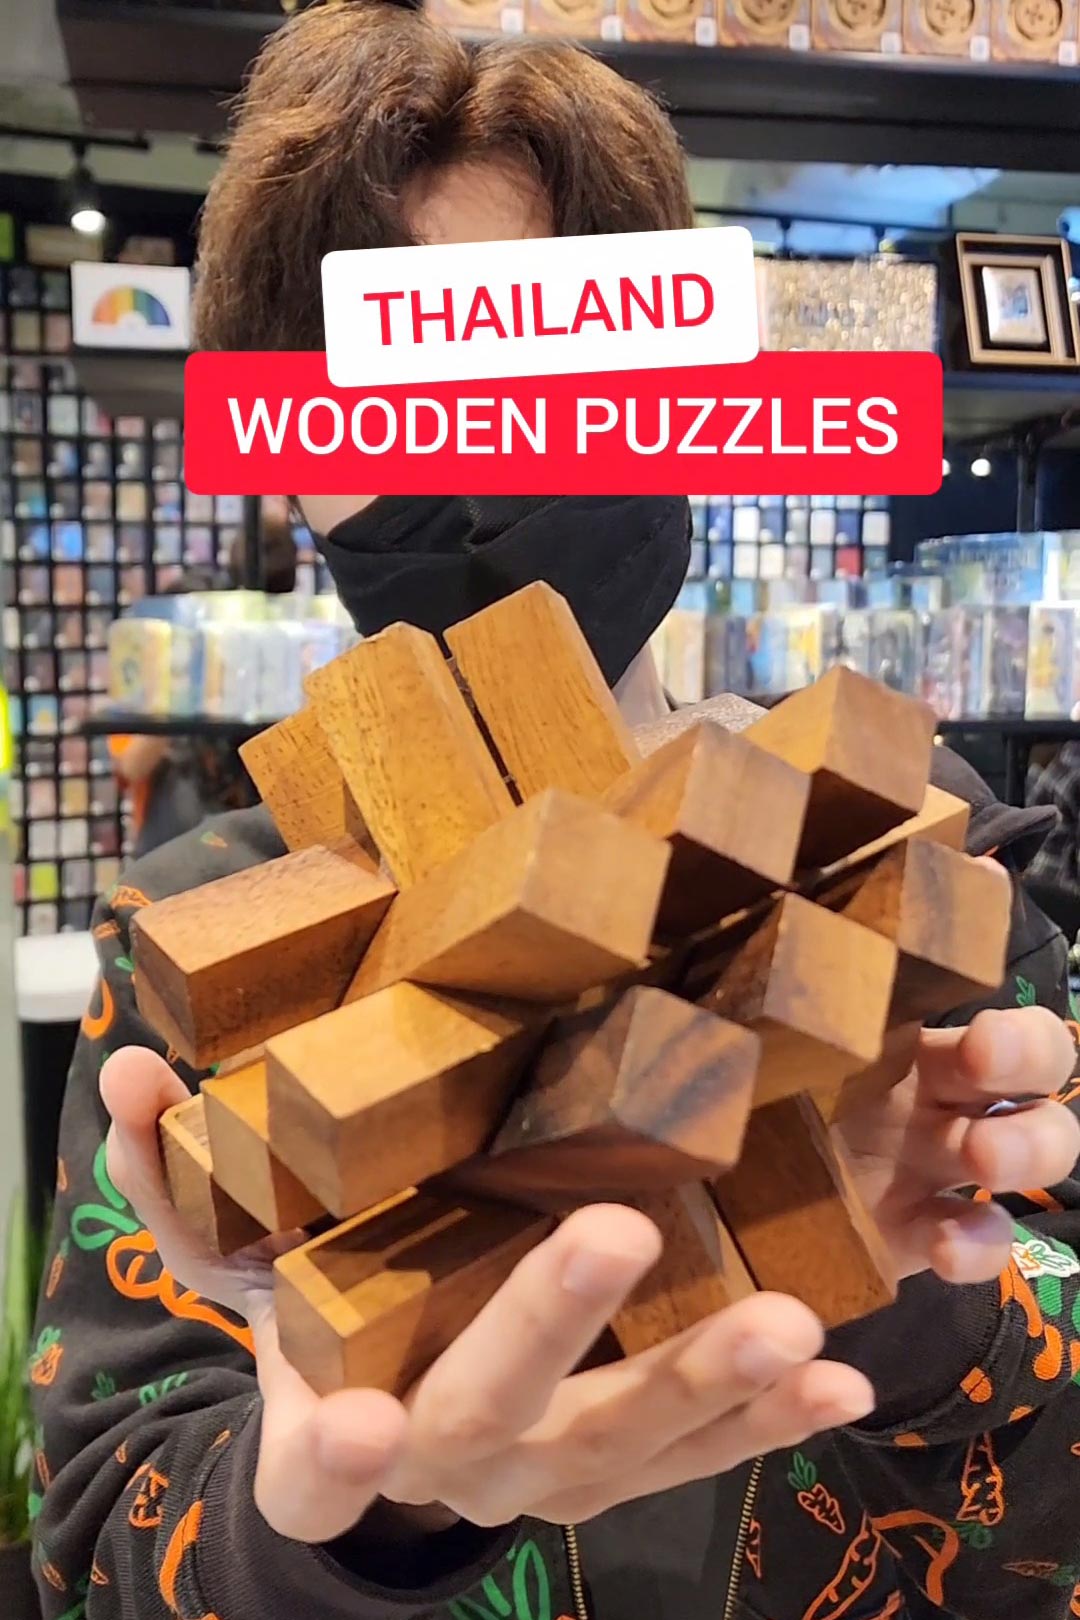 We found some puzzles from Thailand!